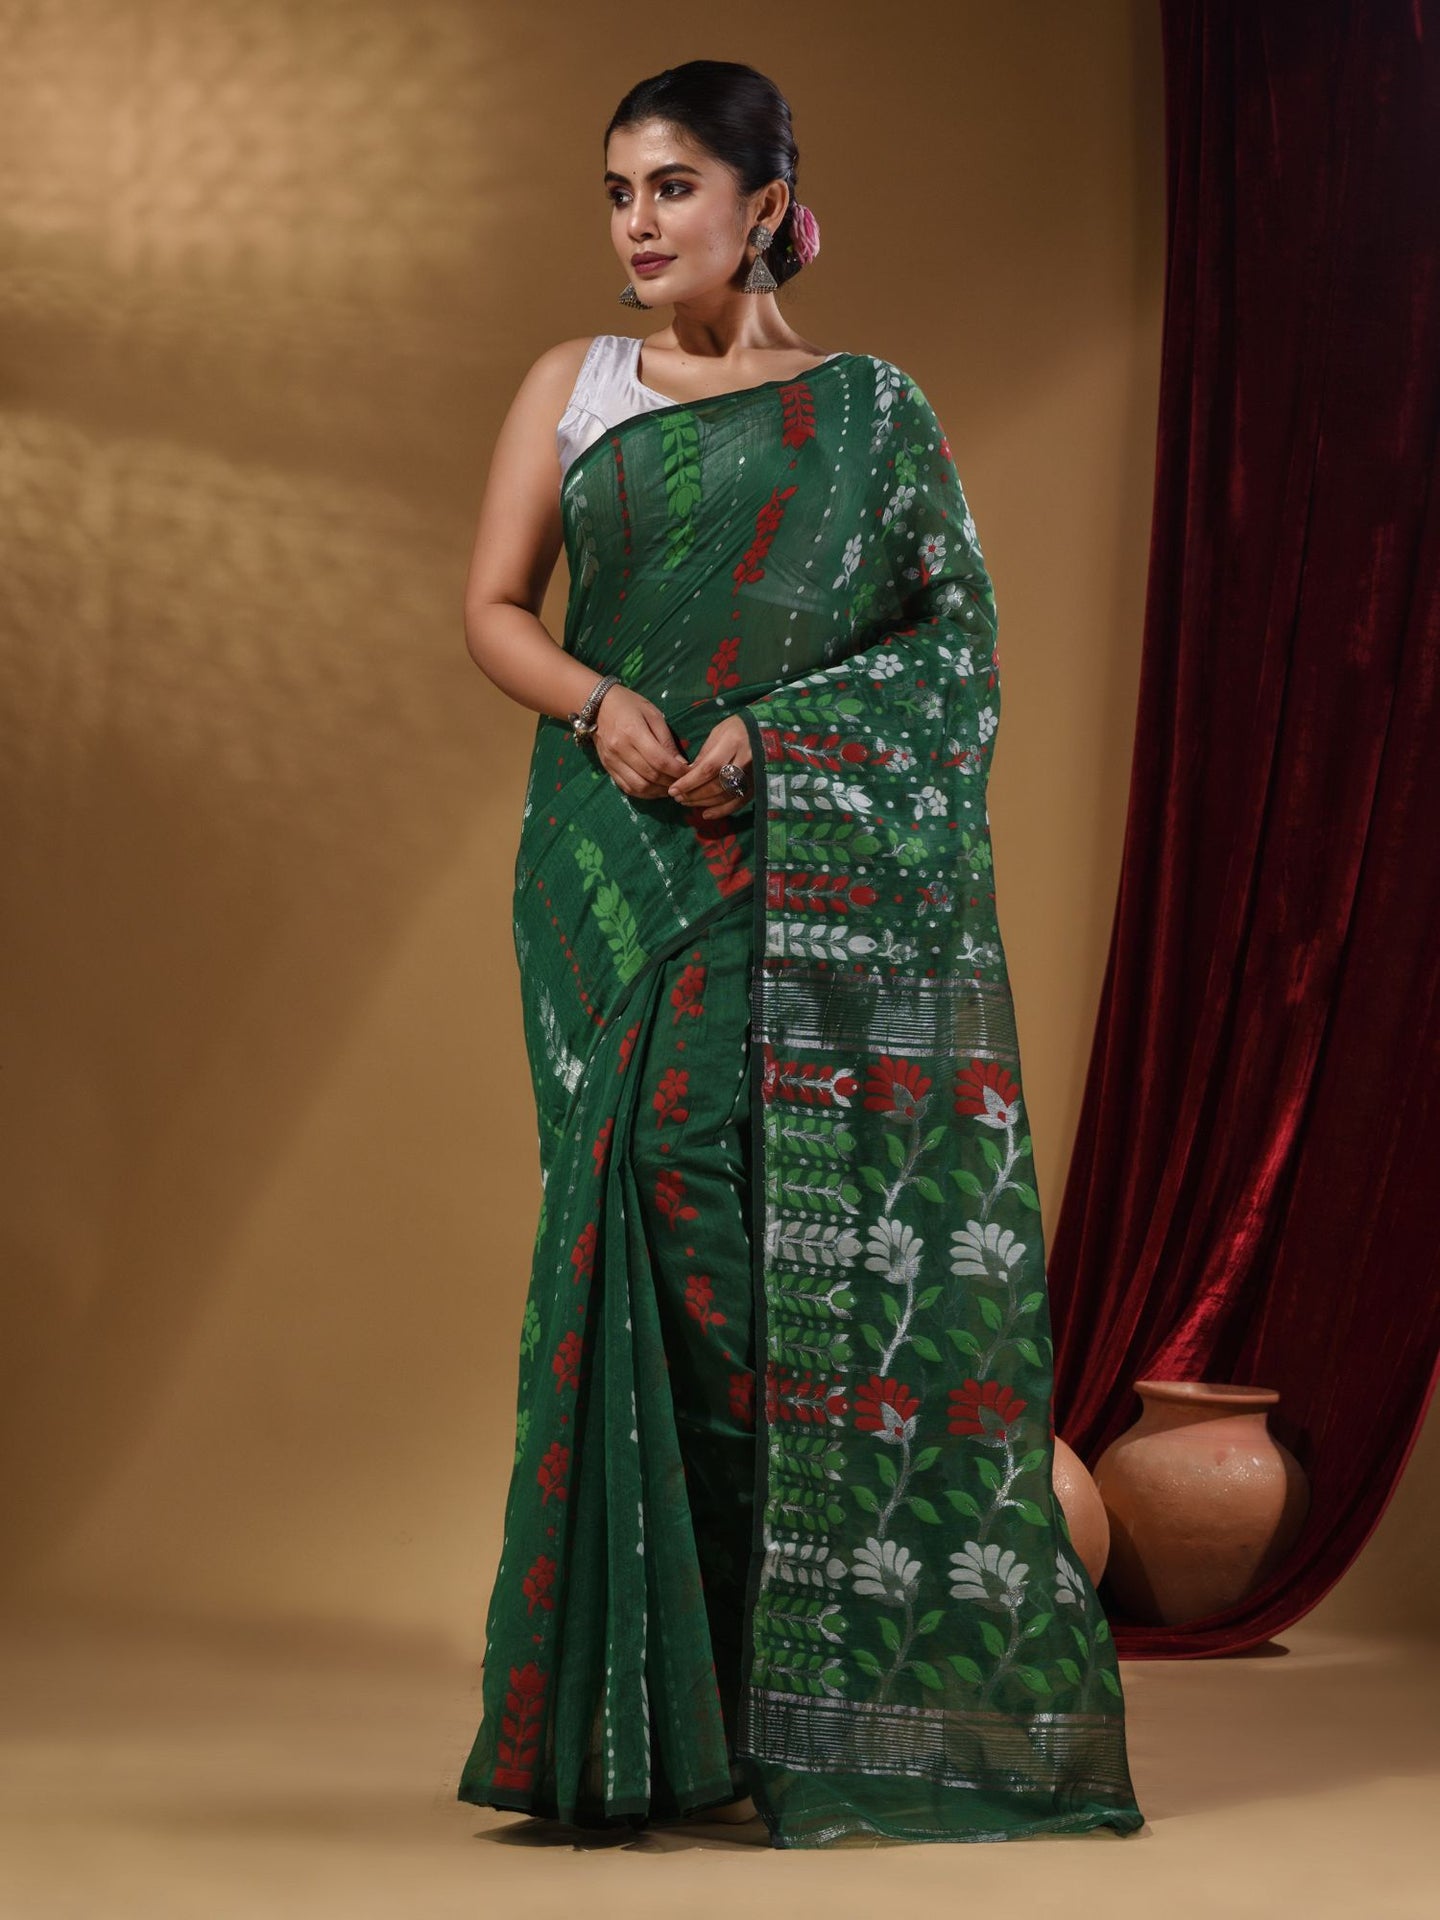 Pine Green Cotton Handwoven Jamdani Saree With Floral Designs And Motifs